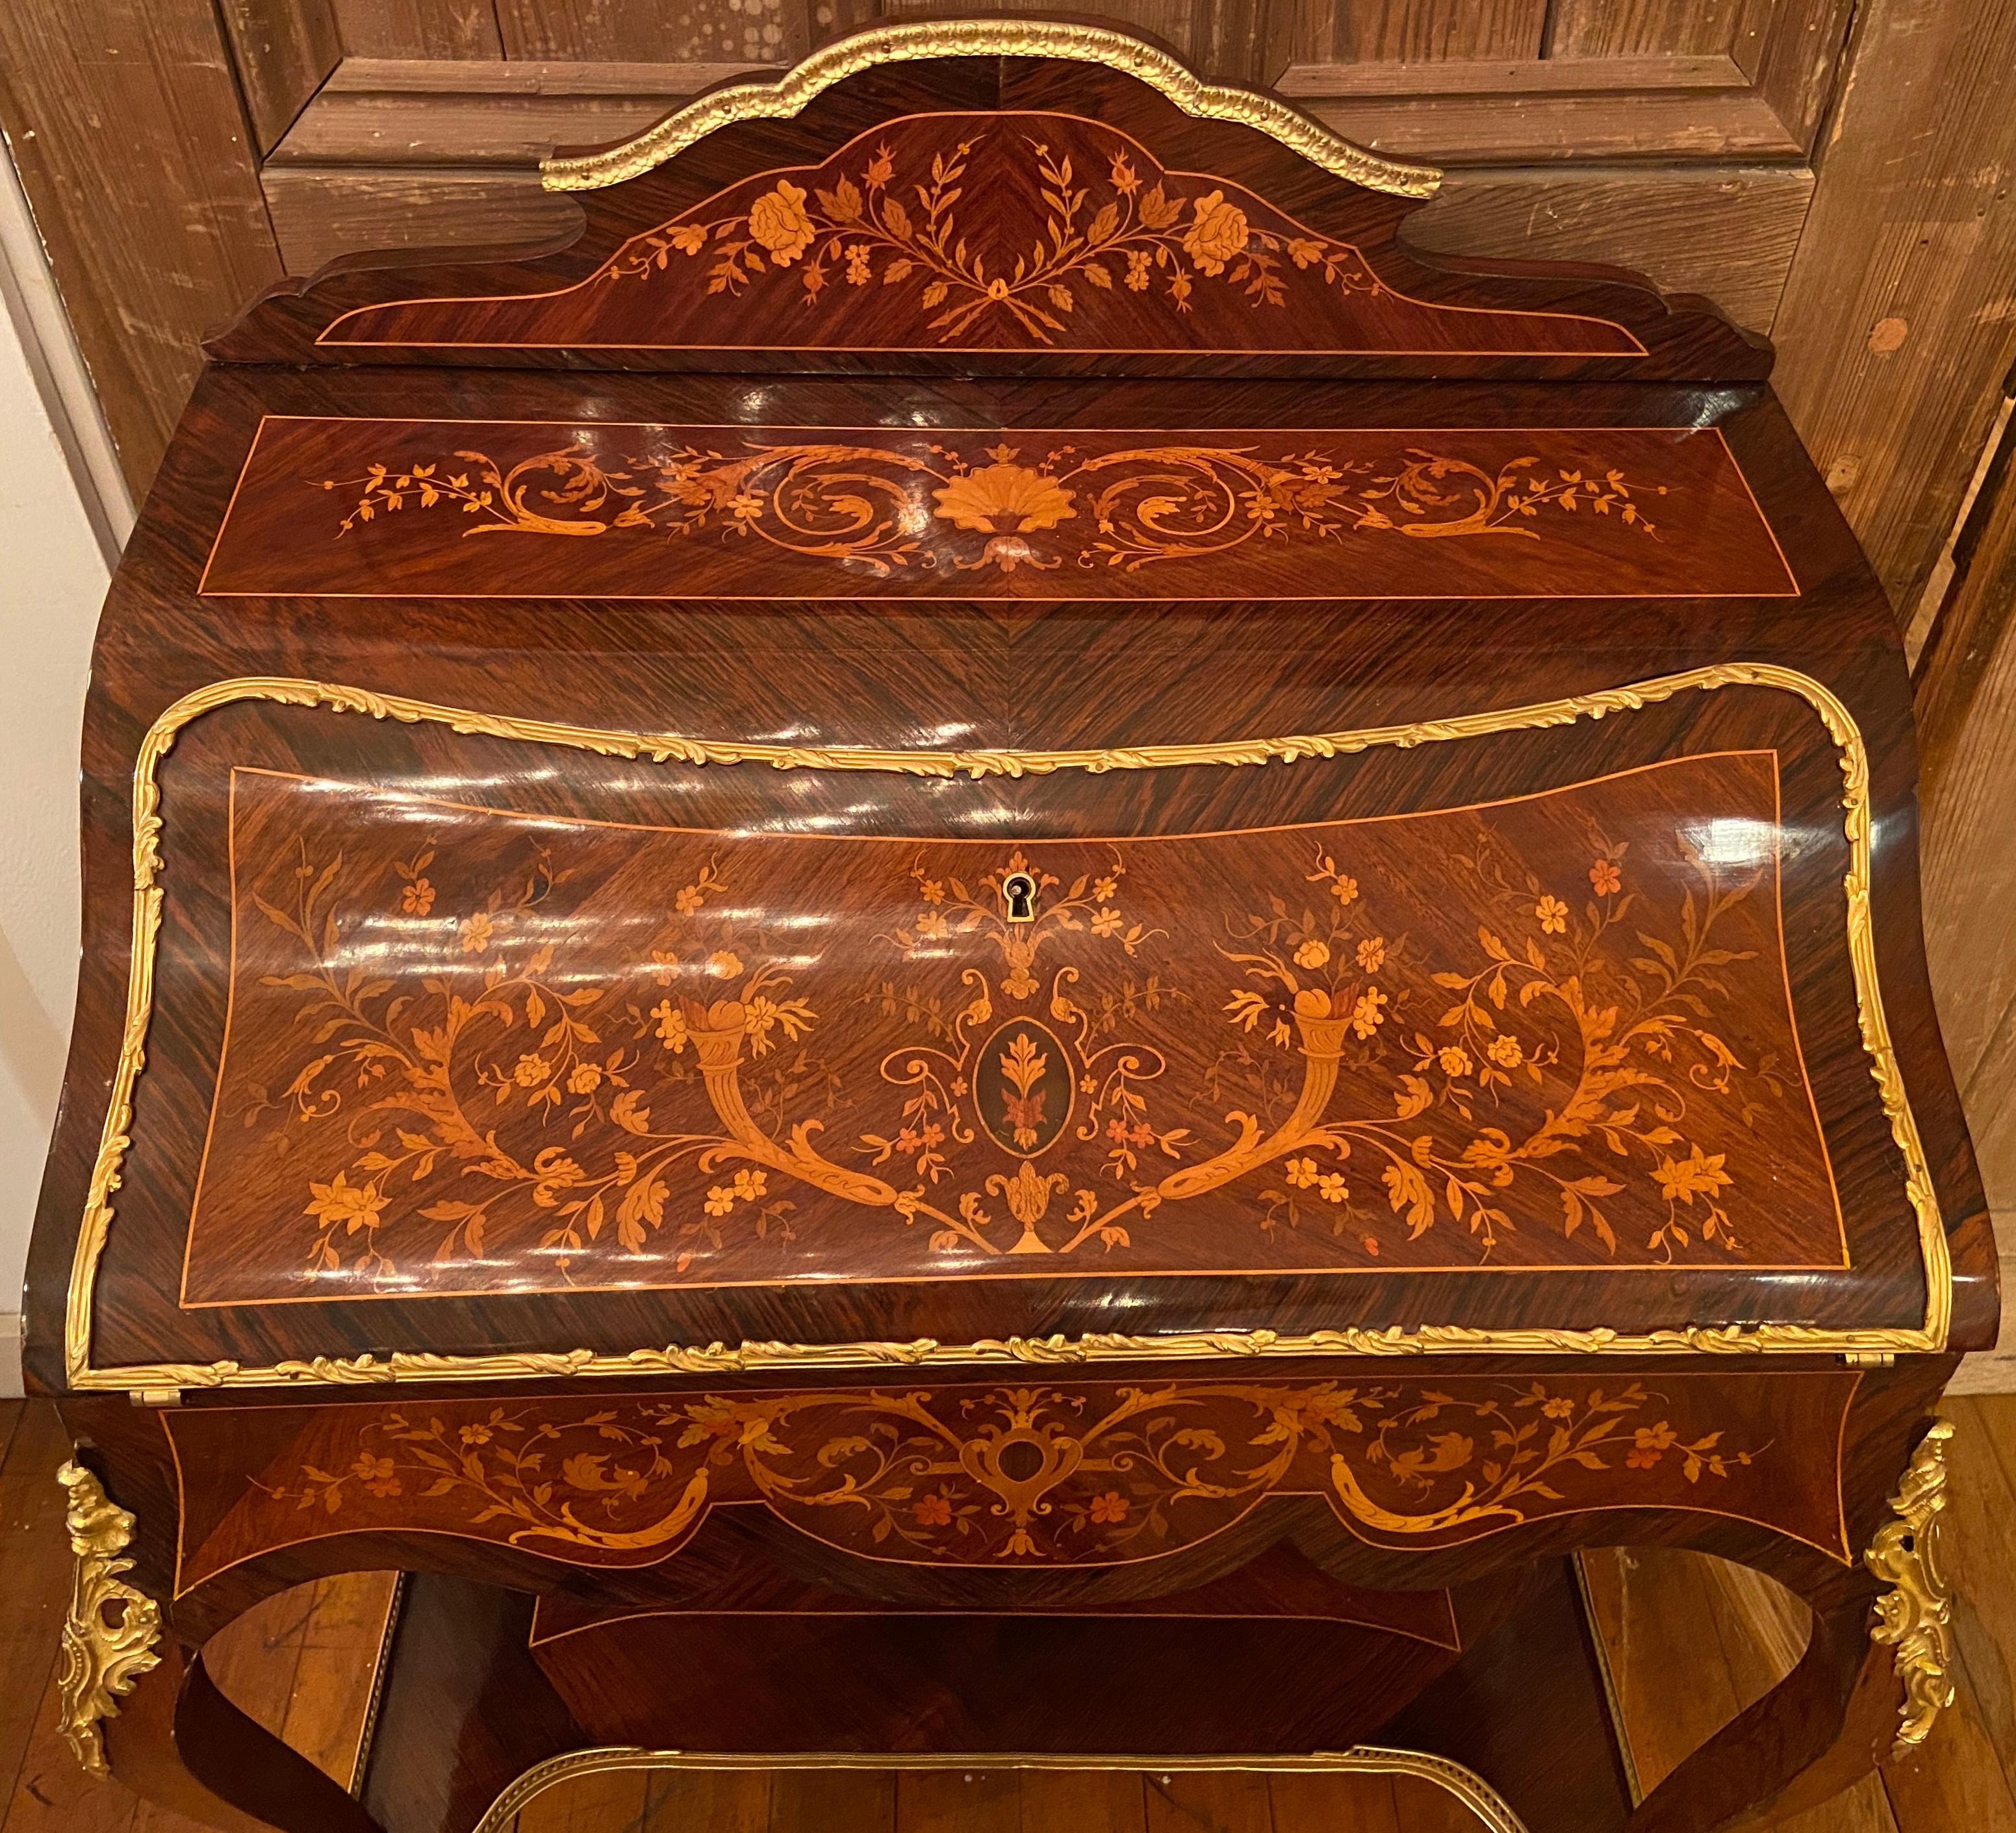 Antique French Ormolu Mounted Kingwood with Inlay Slant-Front Writing Desk, Circa 1880.